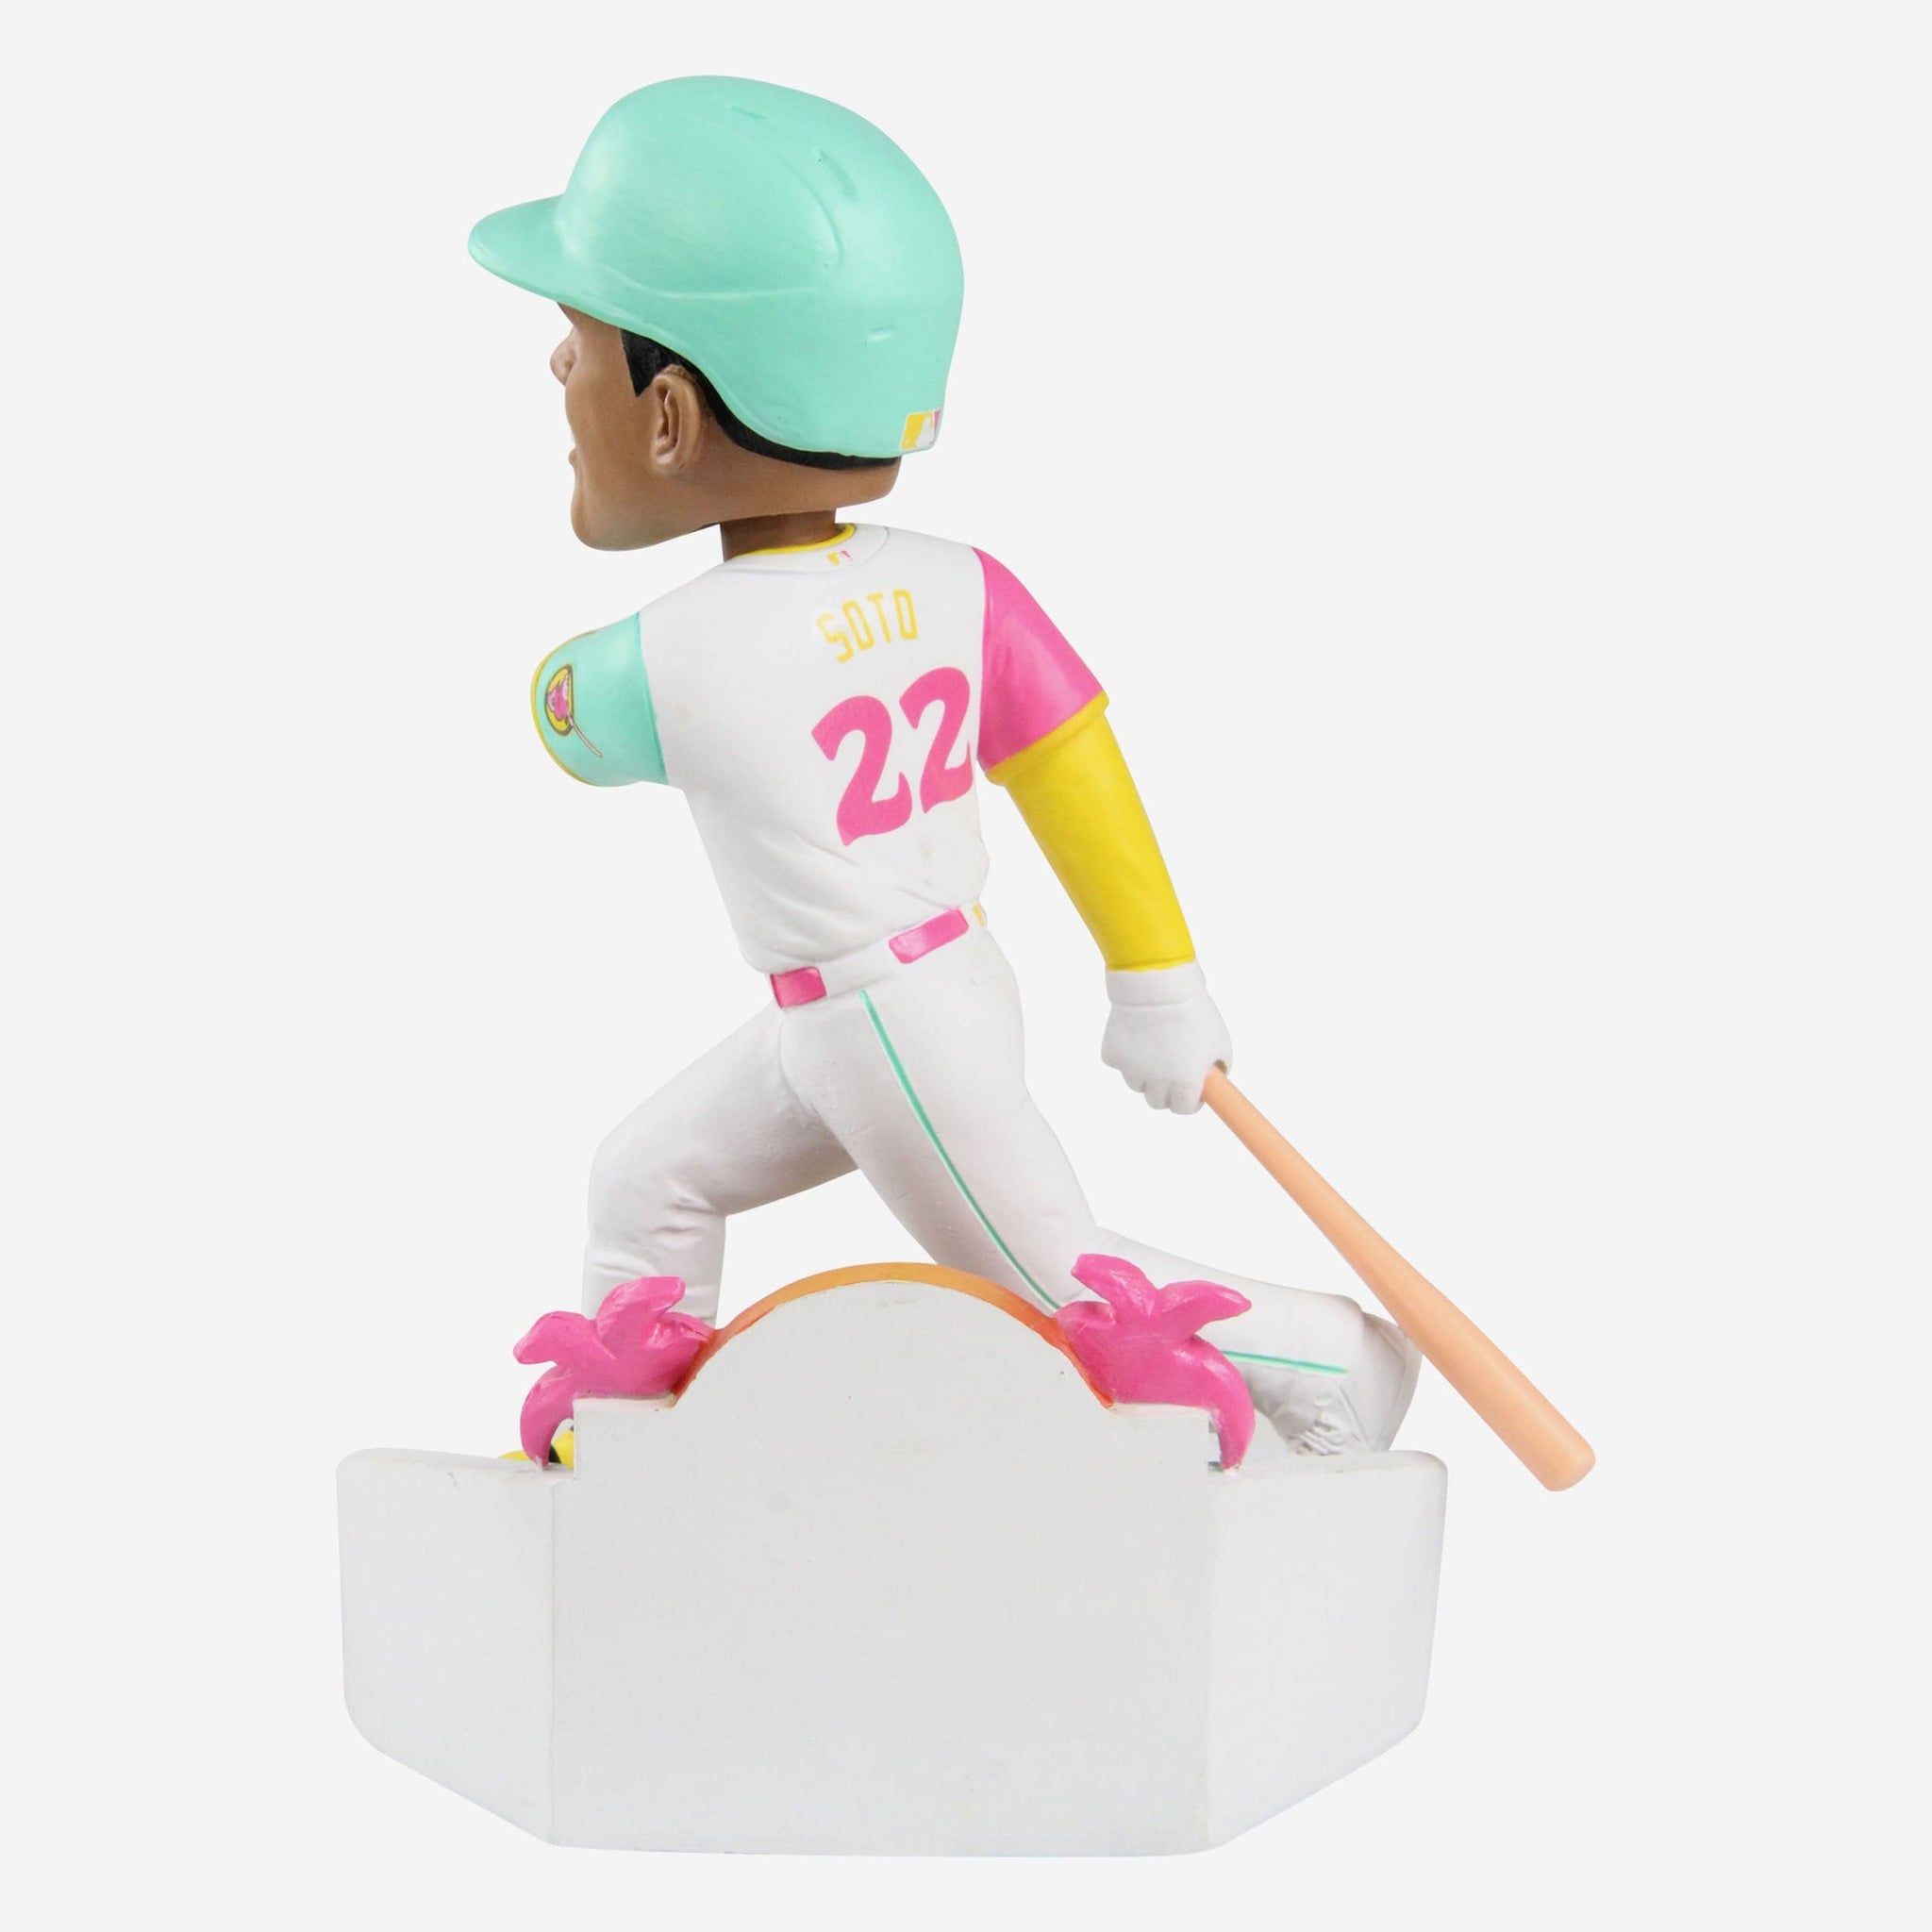 Juan Soto Washington Nationals 2022 City Connect Bobblehead Officially Licensed by MLB